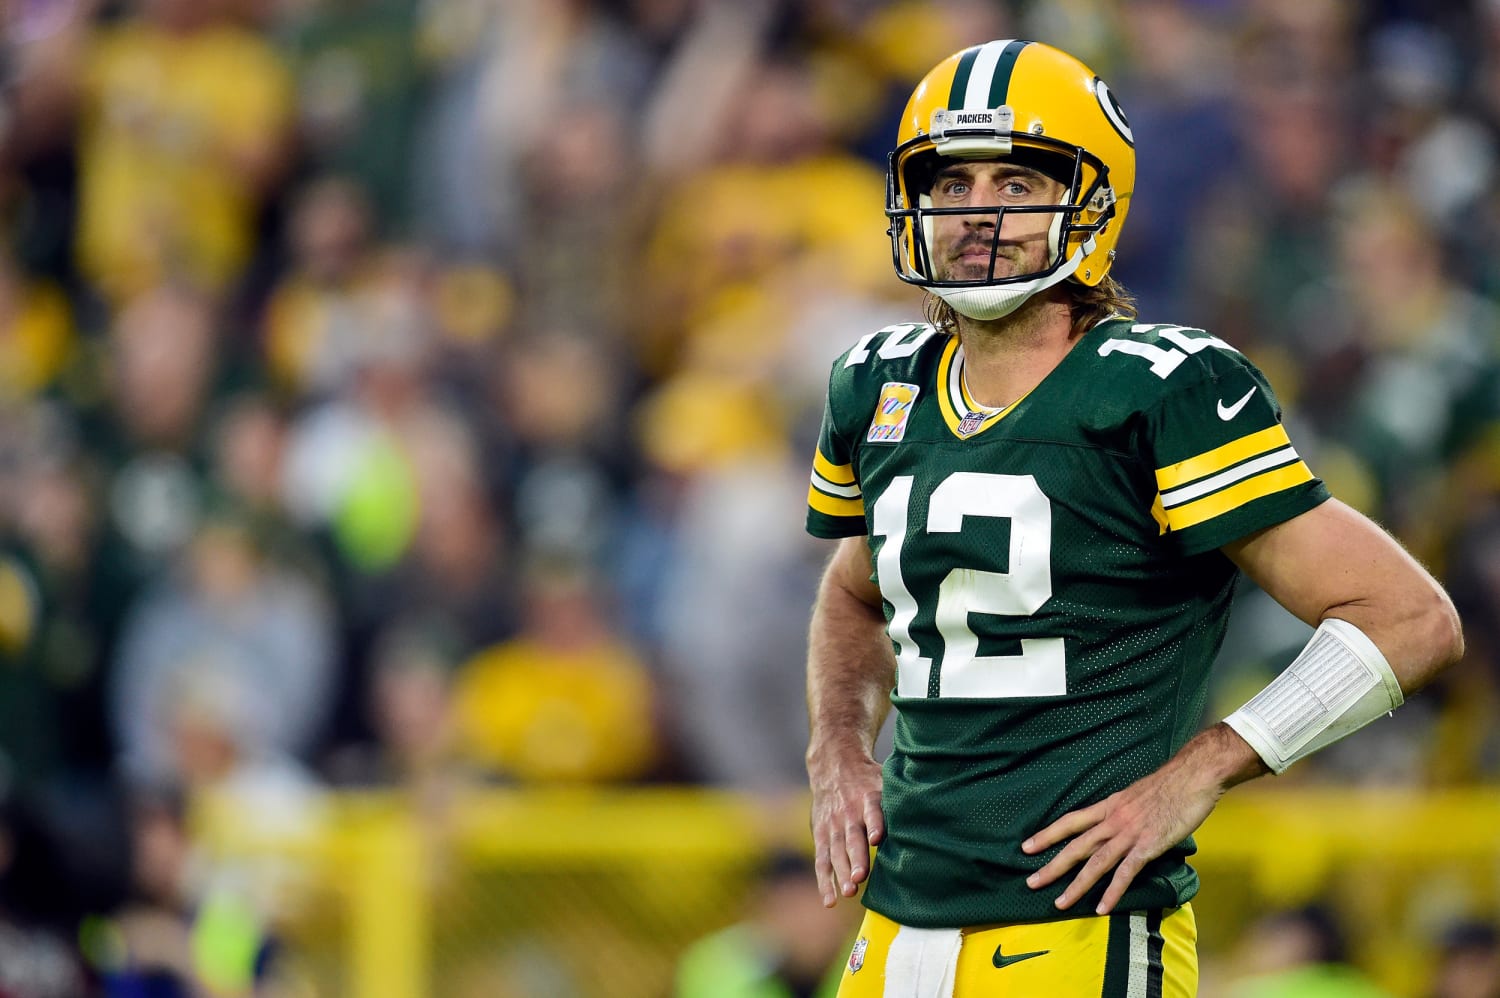 Aaron Rodgers’ State Farm ads might vanish. What’s next for his personal brand?